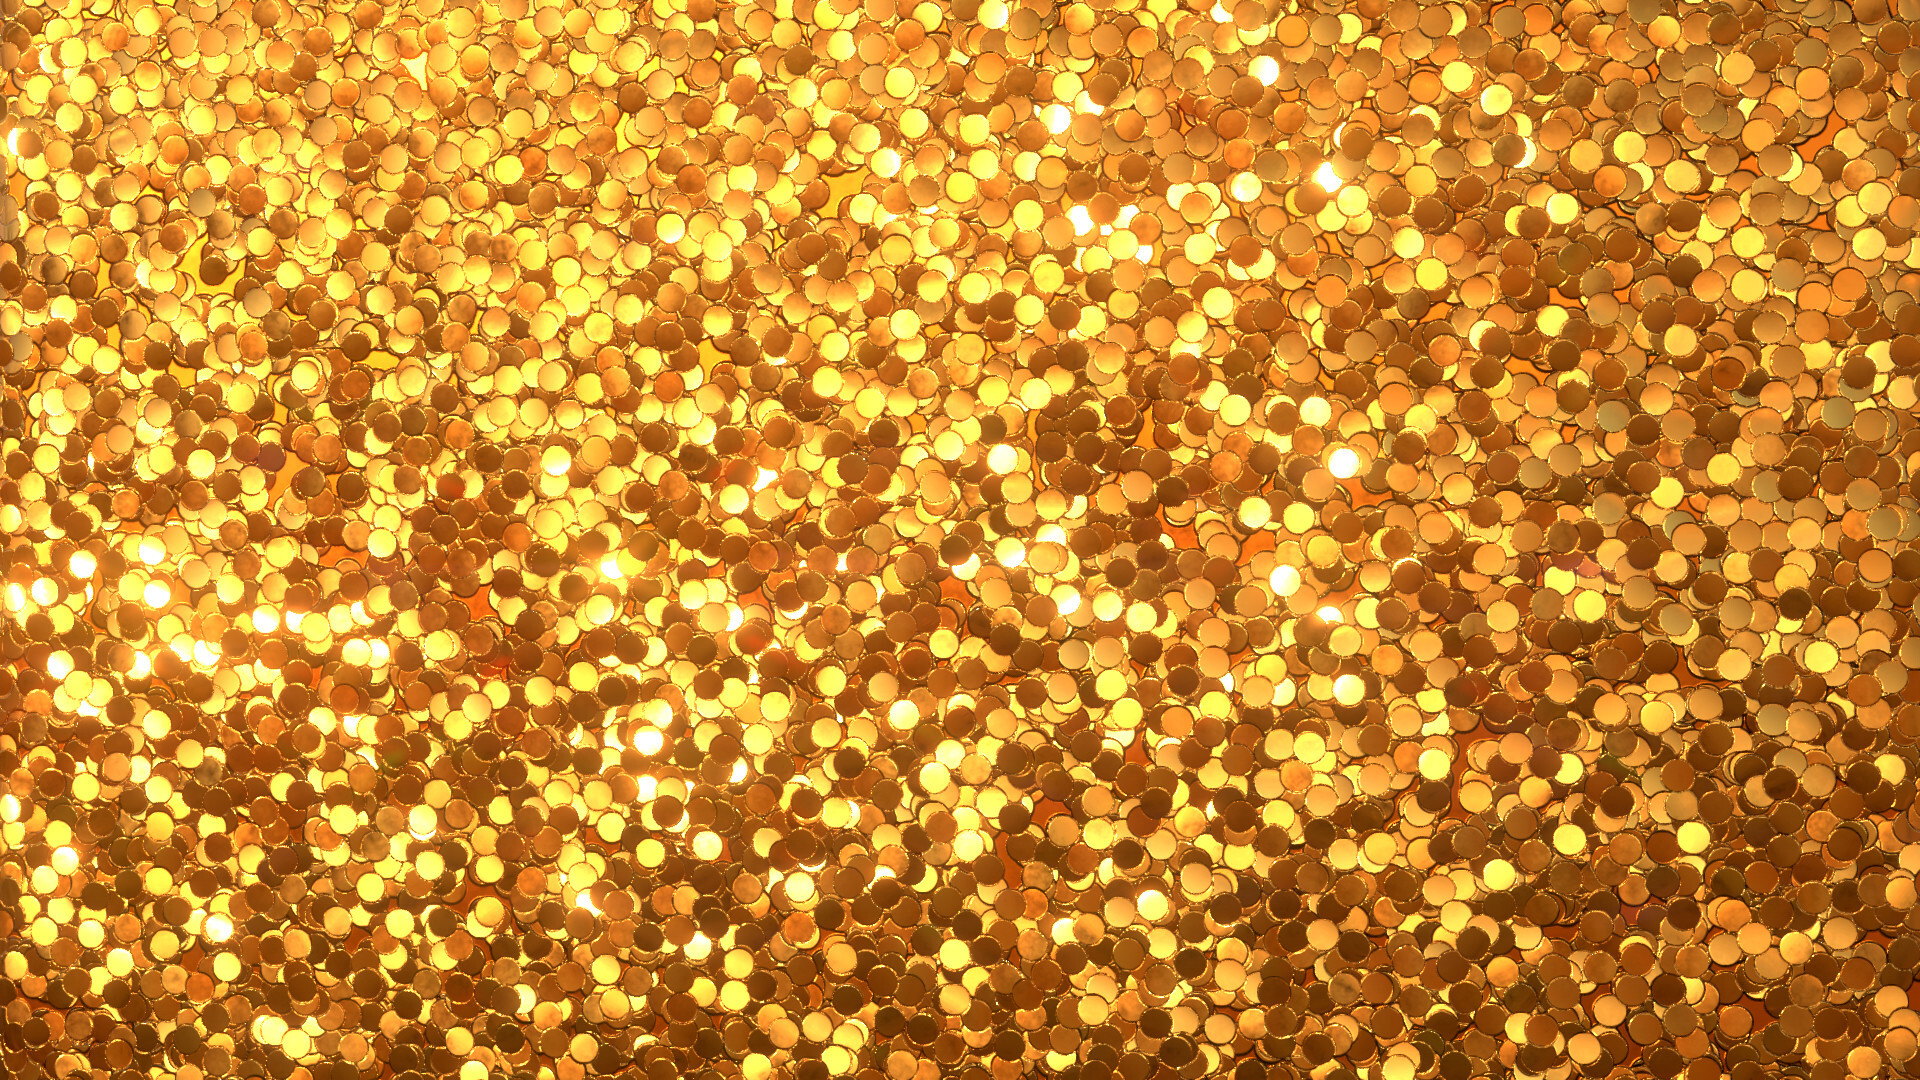 Gold Sparkle: An assortment of small, reflective particles, Sheets of golden-colored material cut into various shapes. 1920x1080 Full HD Wallpaper.